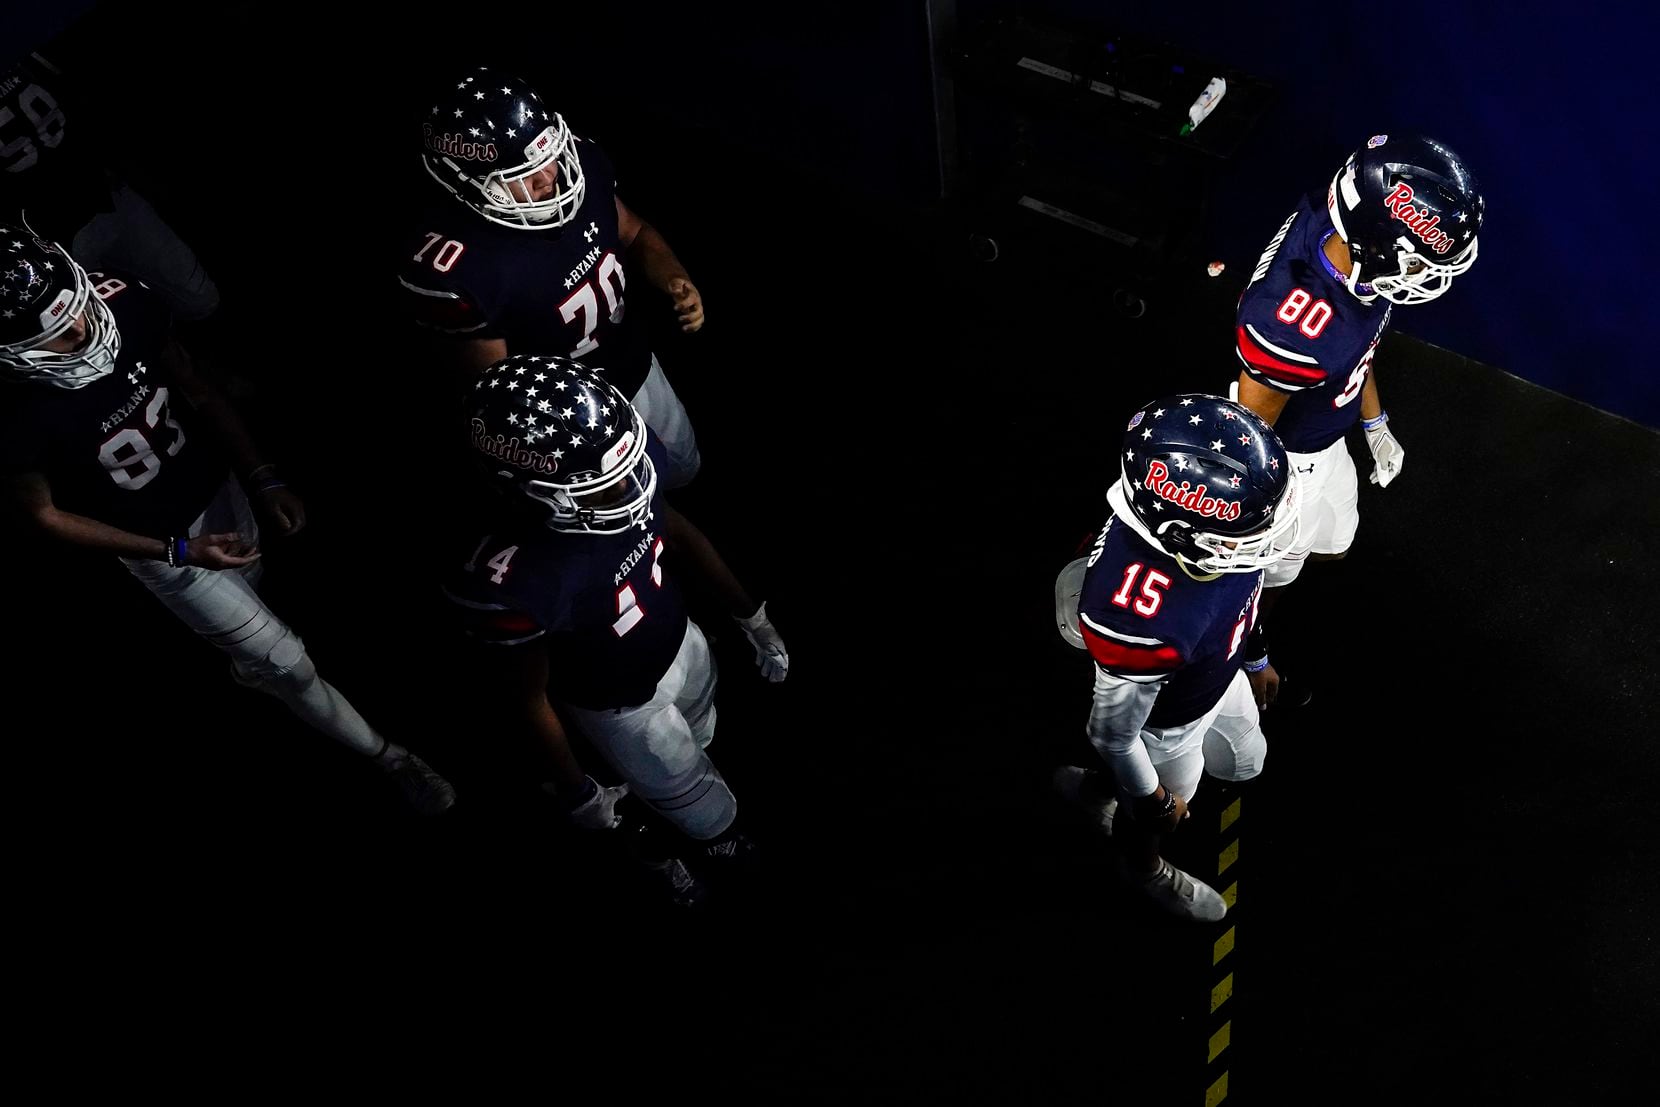 Denton Ryan players take the field to face Cedar Park in the Class 5A Division I state football championship game at AT&T Stadium on Friday, Jan. 15, 2021, in Arlington, Texas. (Smiley N. Pool/The Dallas Morning News)